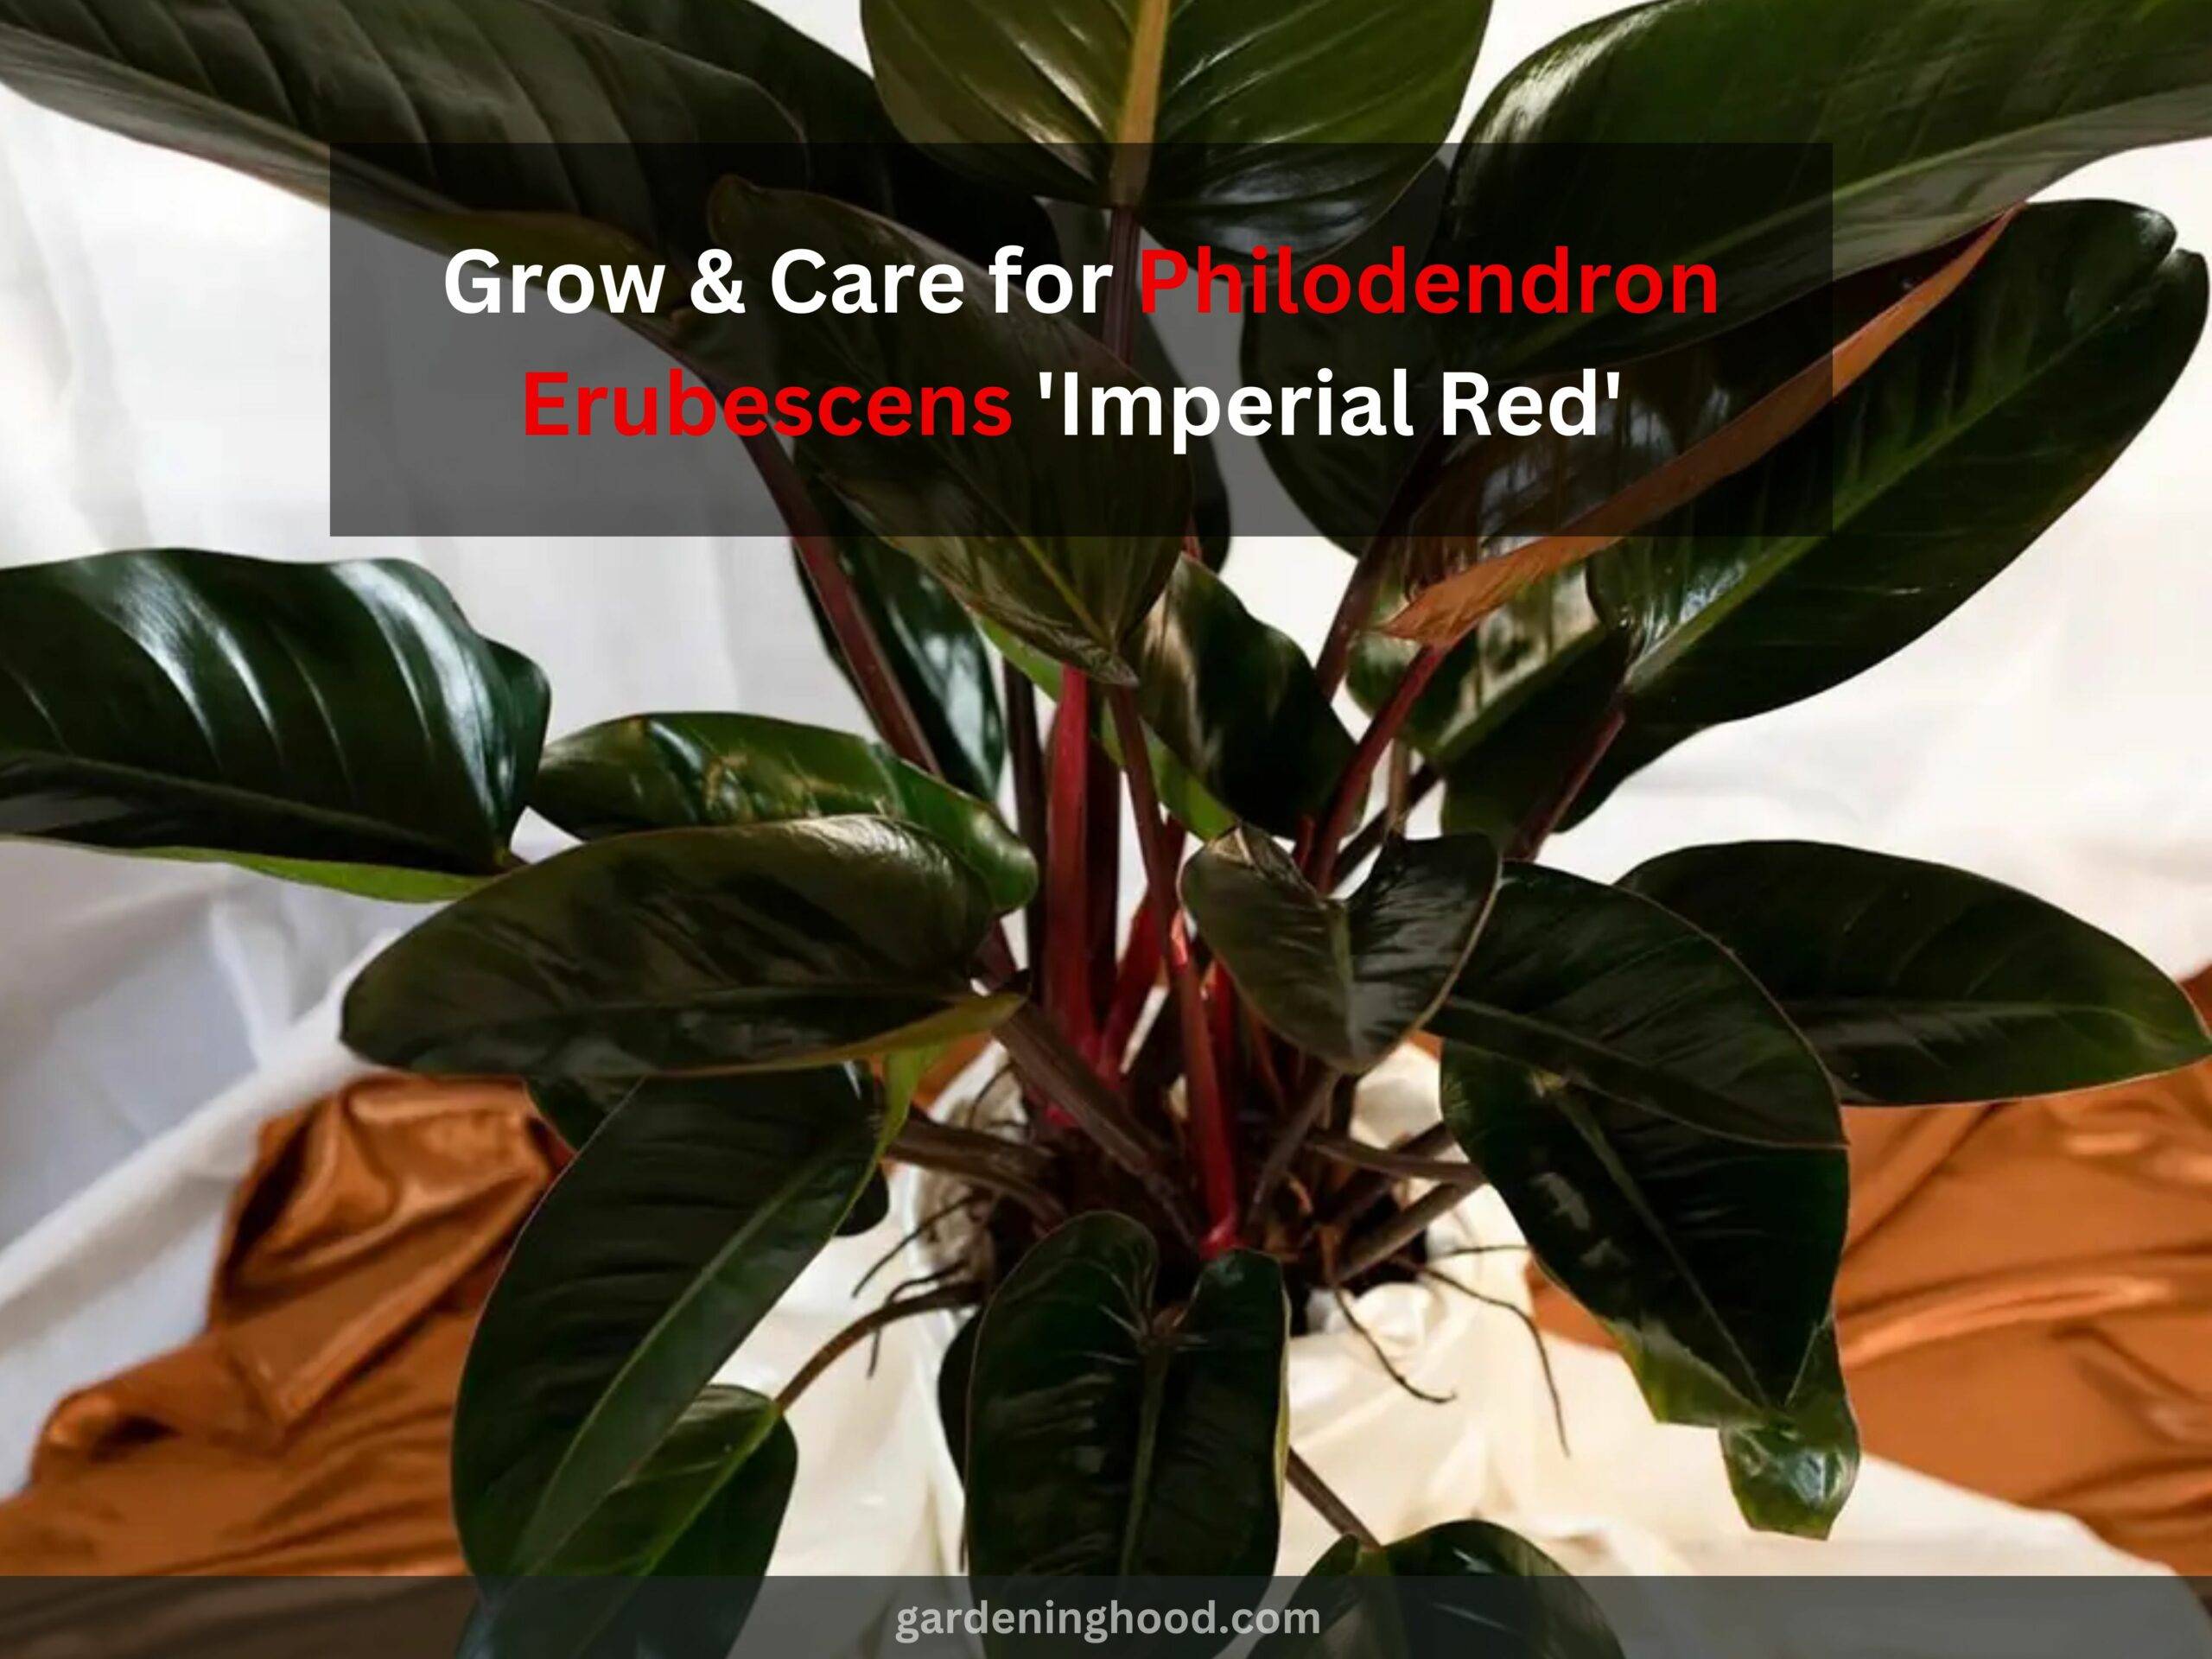 How to Grow & Care for Philodendron Erubescens 'Imperial Red'